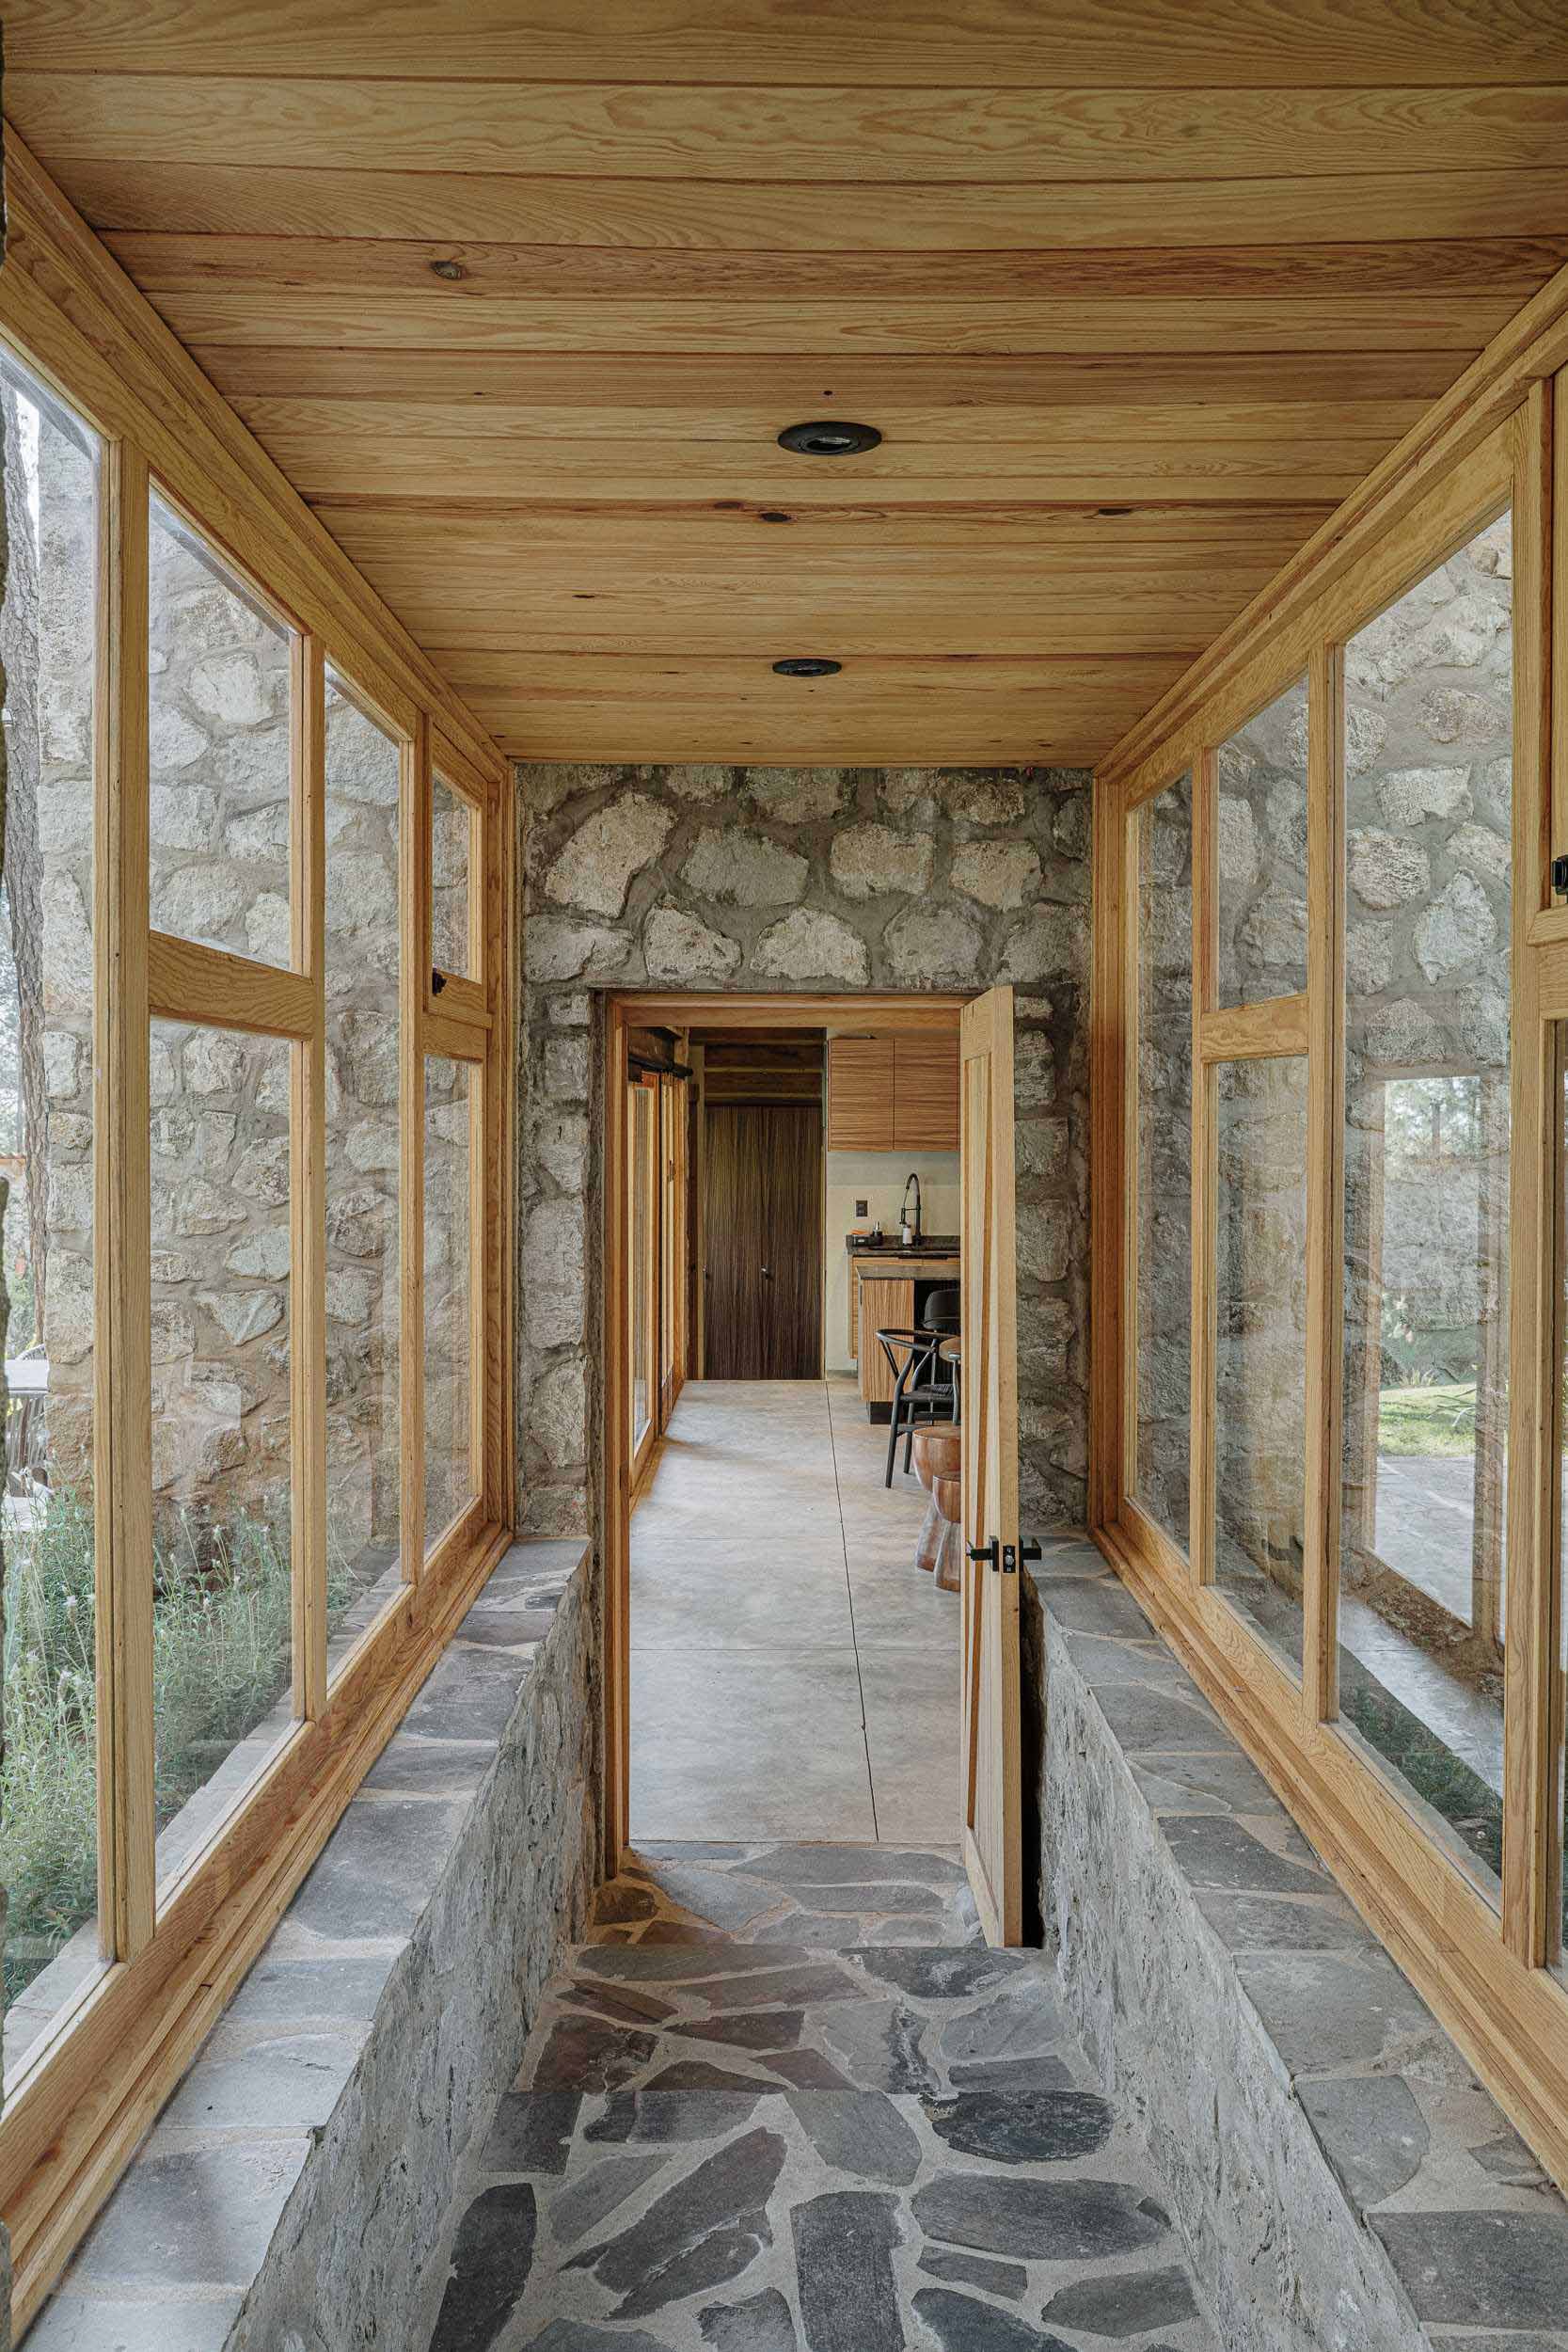 A contemporary home with stone walls, wood framing, and a glass corridor.